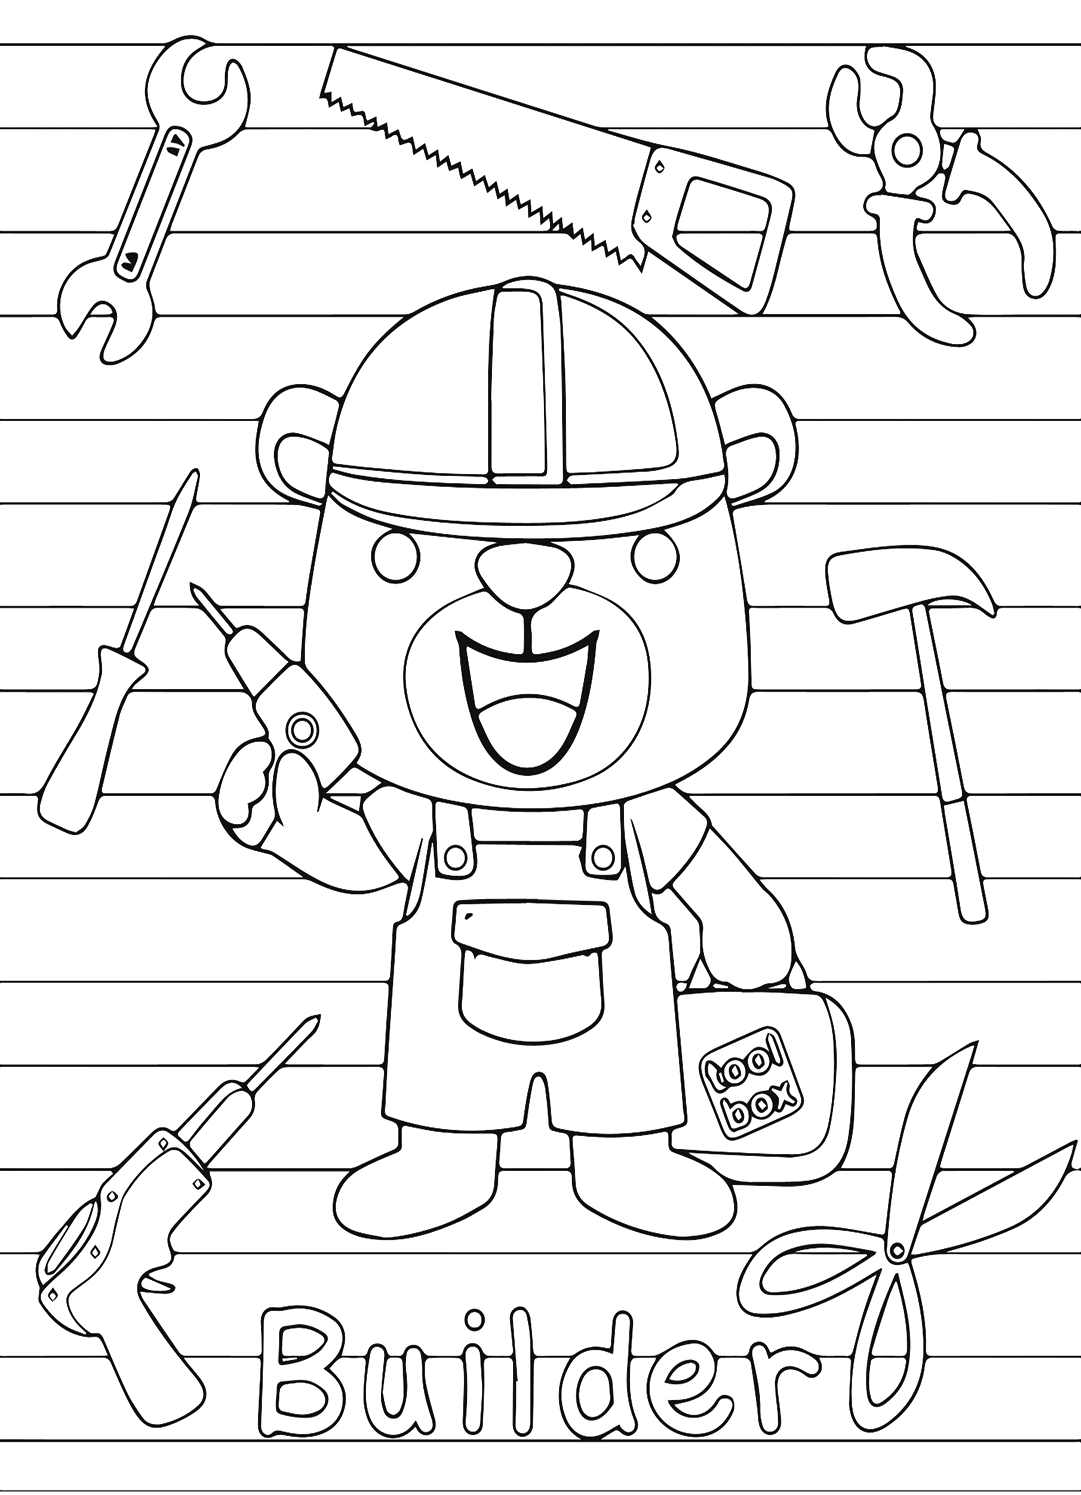 Bear and Toolbox Coloring Page